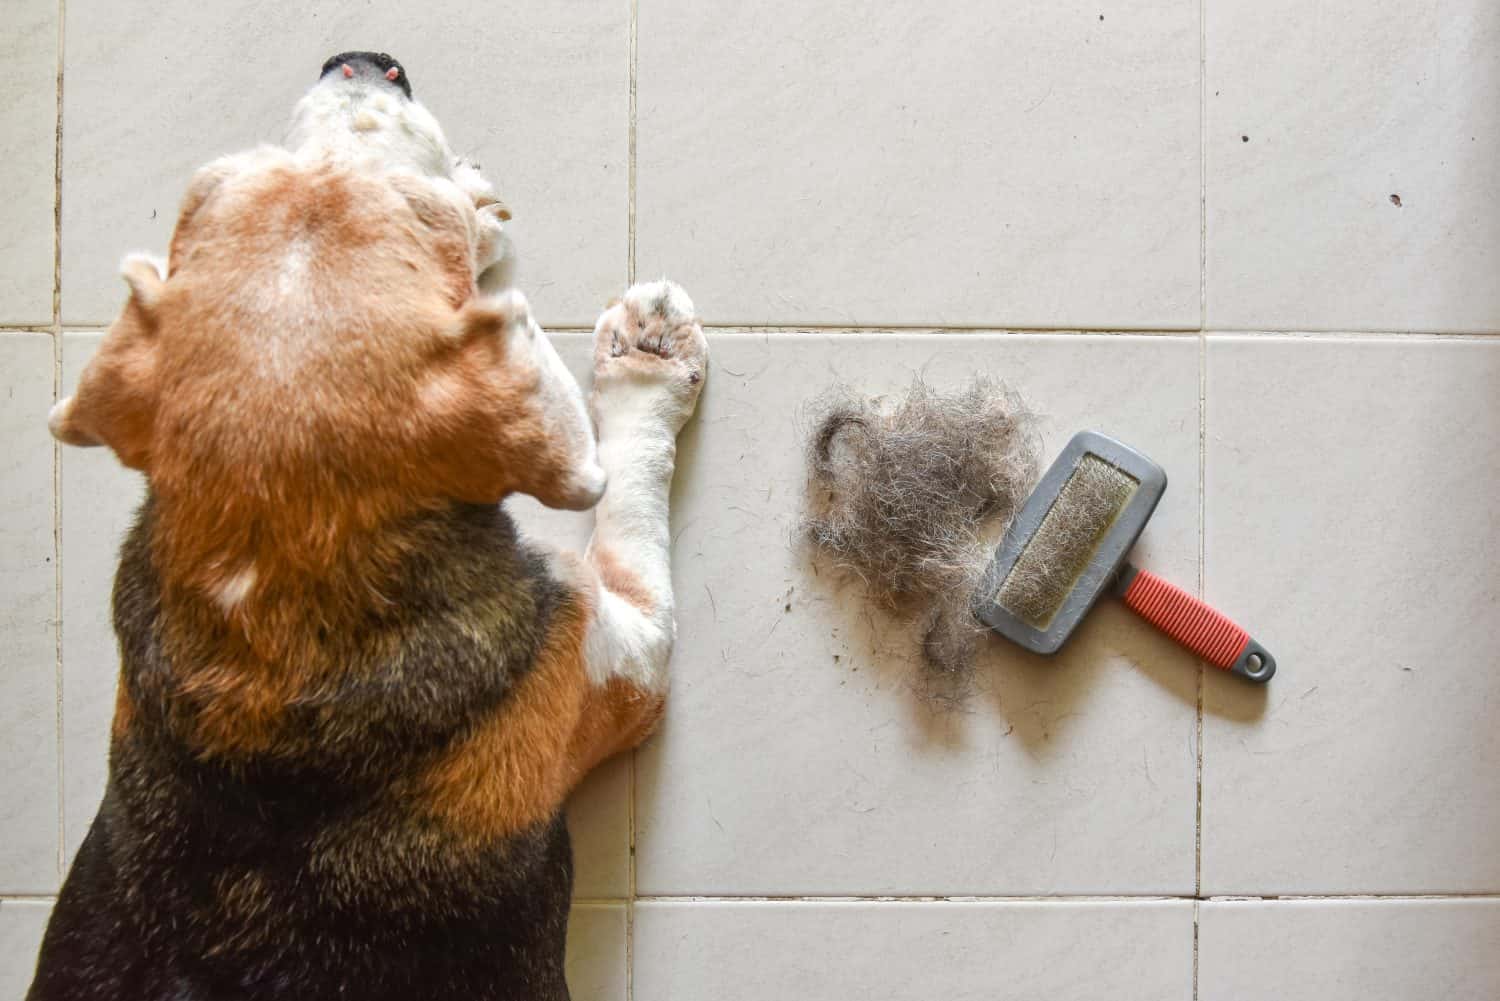 a beagle with Big pile of dog hair and which brush to comb out the dog on floor, Bunch of dog hair after grooming, Shedding tool, Hair combed from the dog with brush, top view